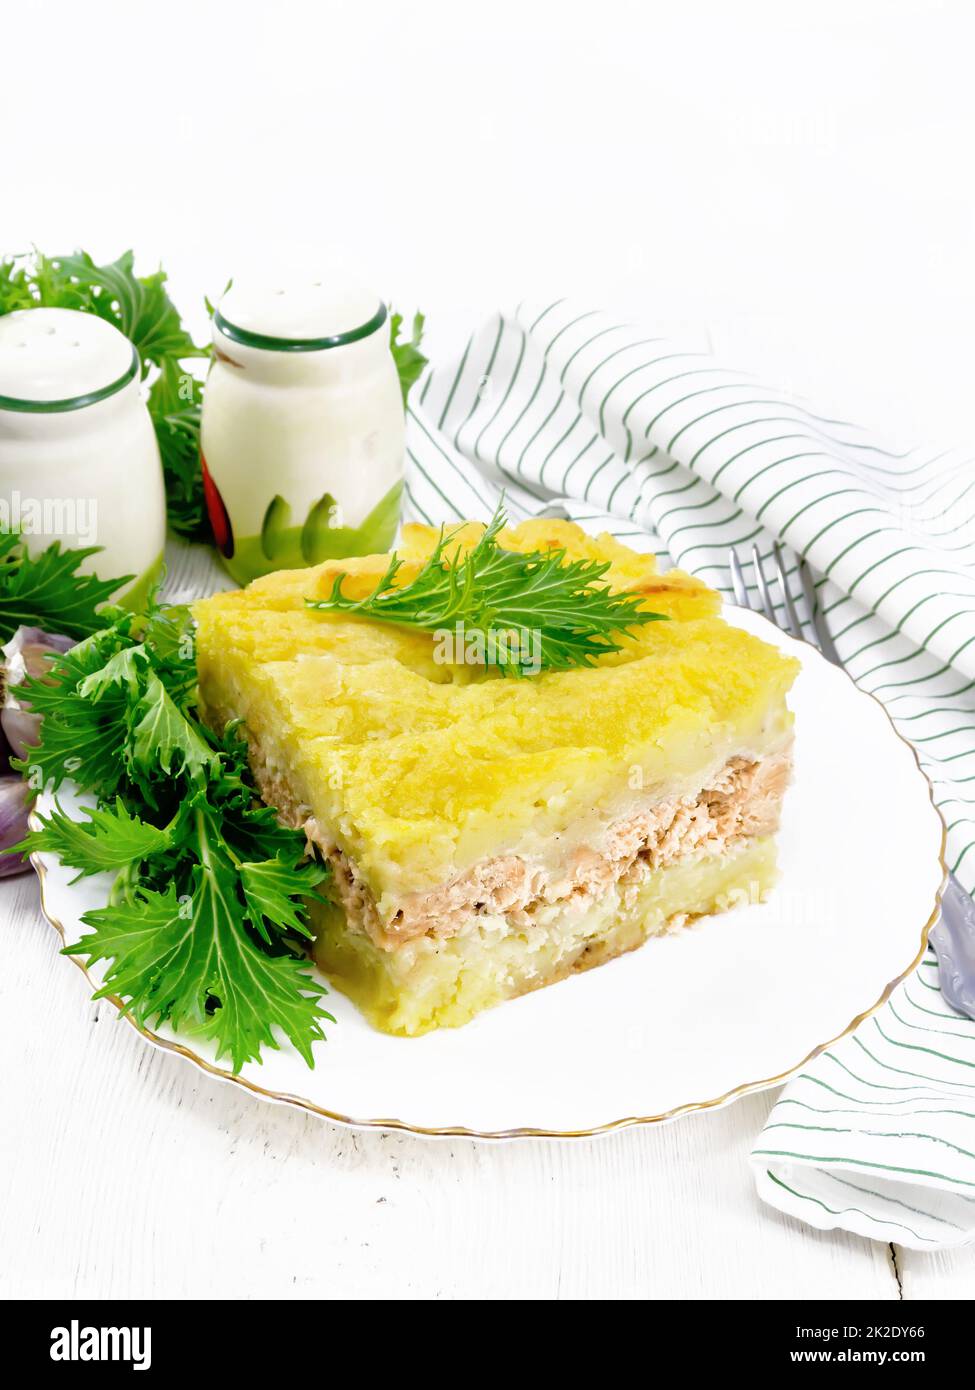 Casserole with potatoes and fish in plate on table Stock Photo